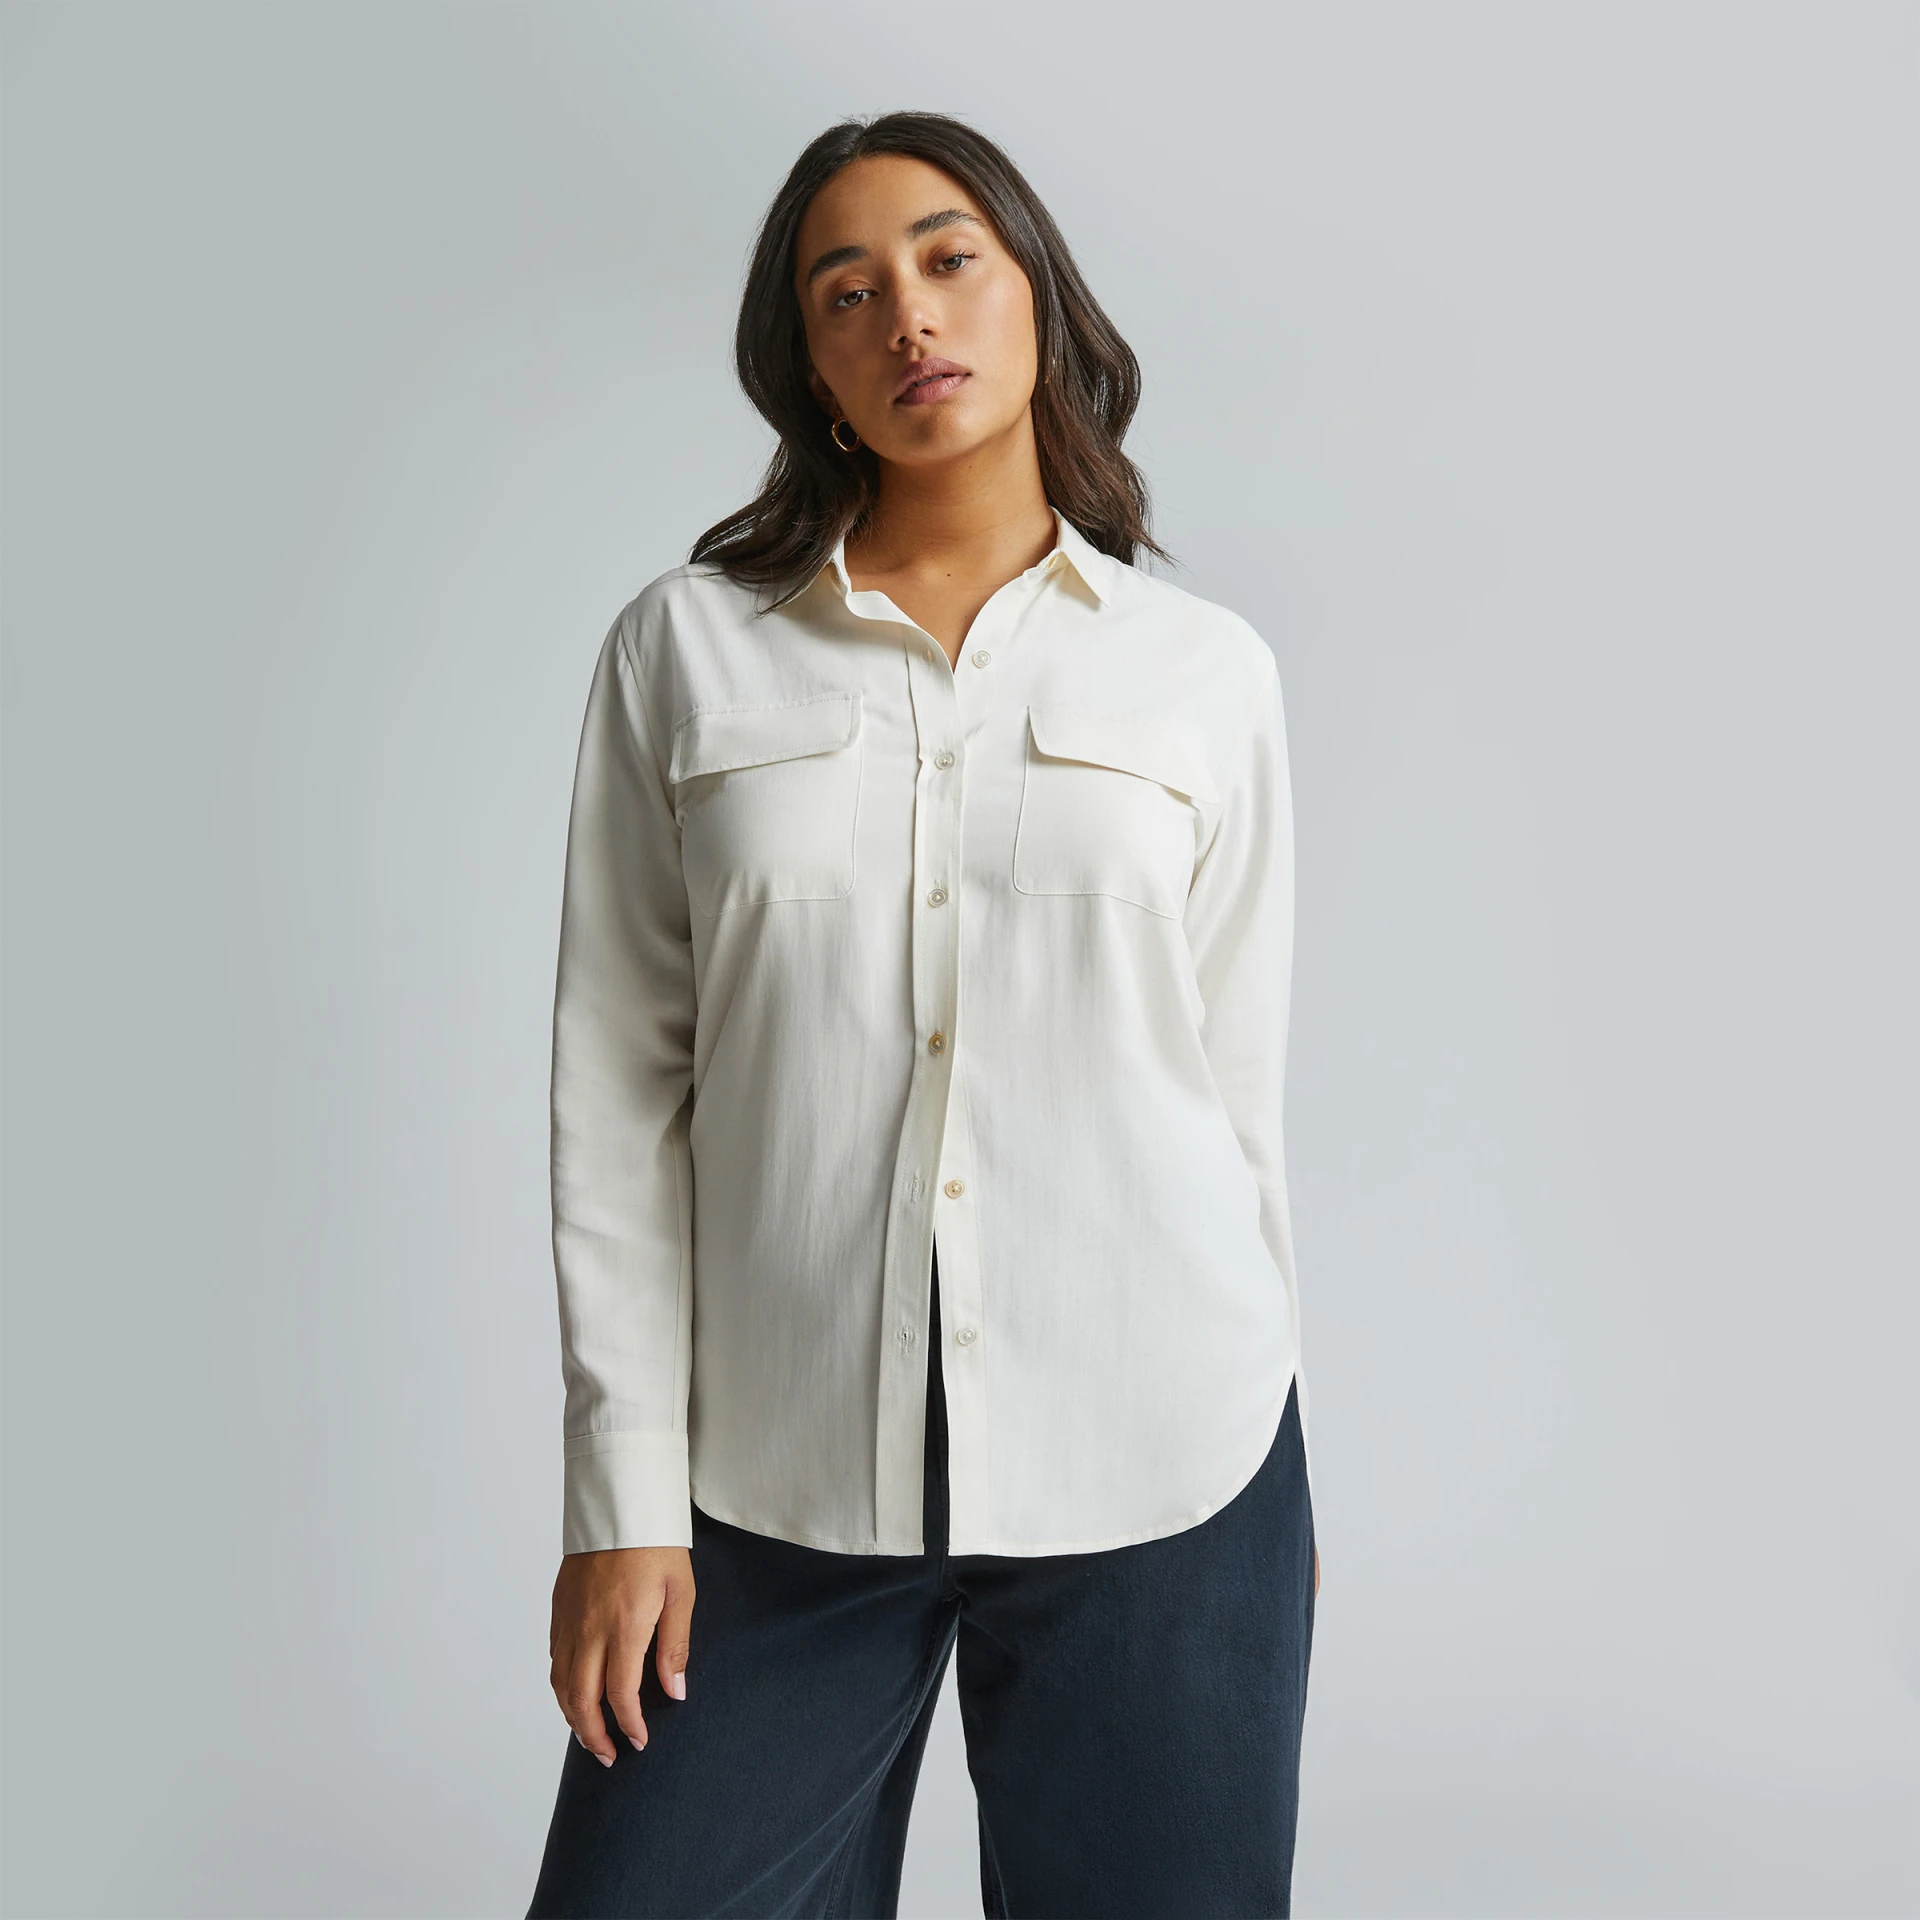 Woman in white long-sleeve button down shirt 